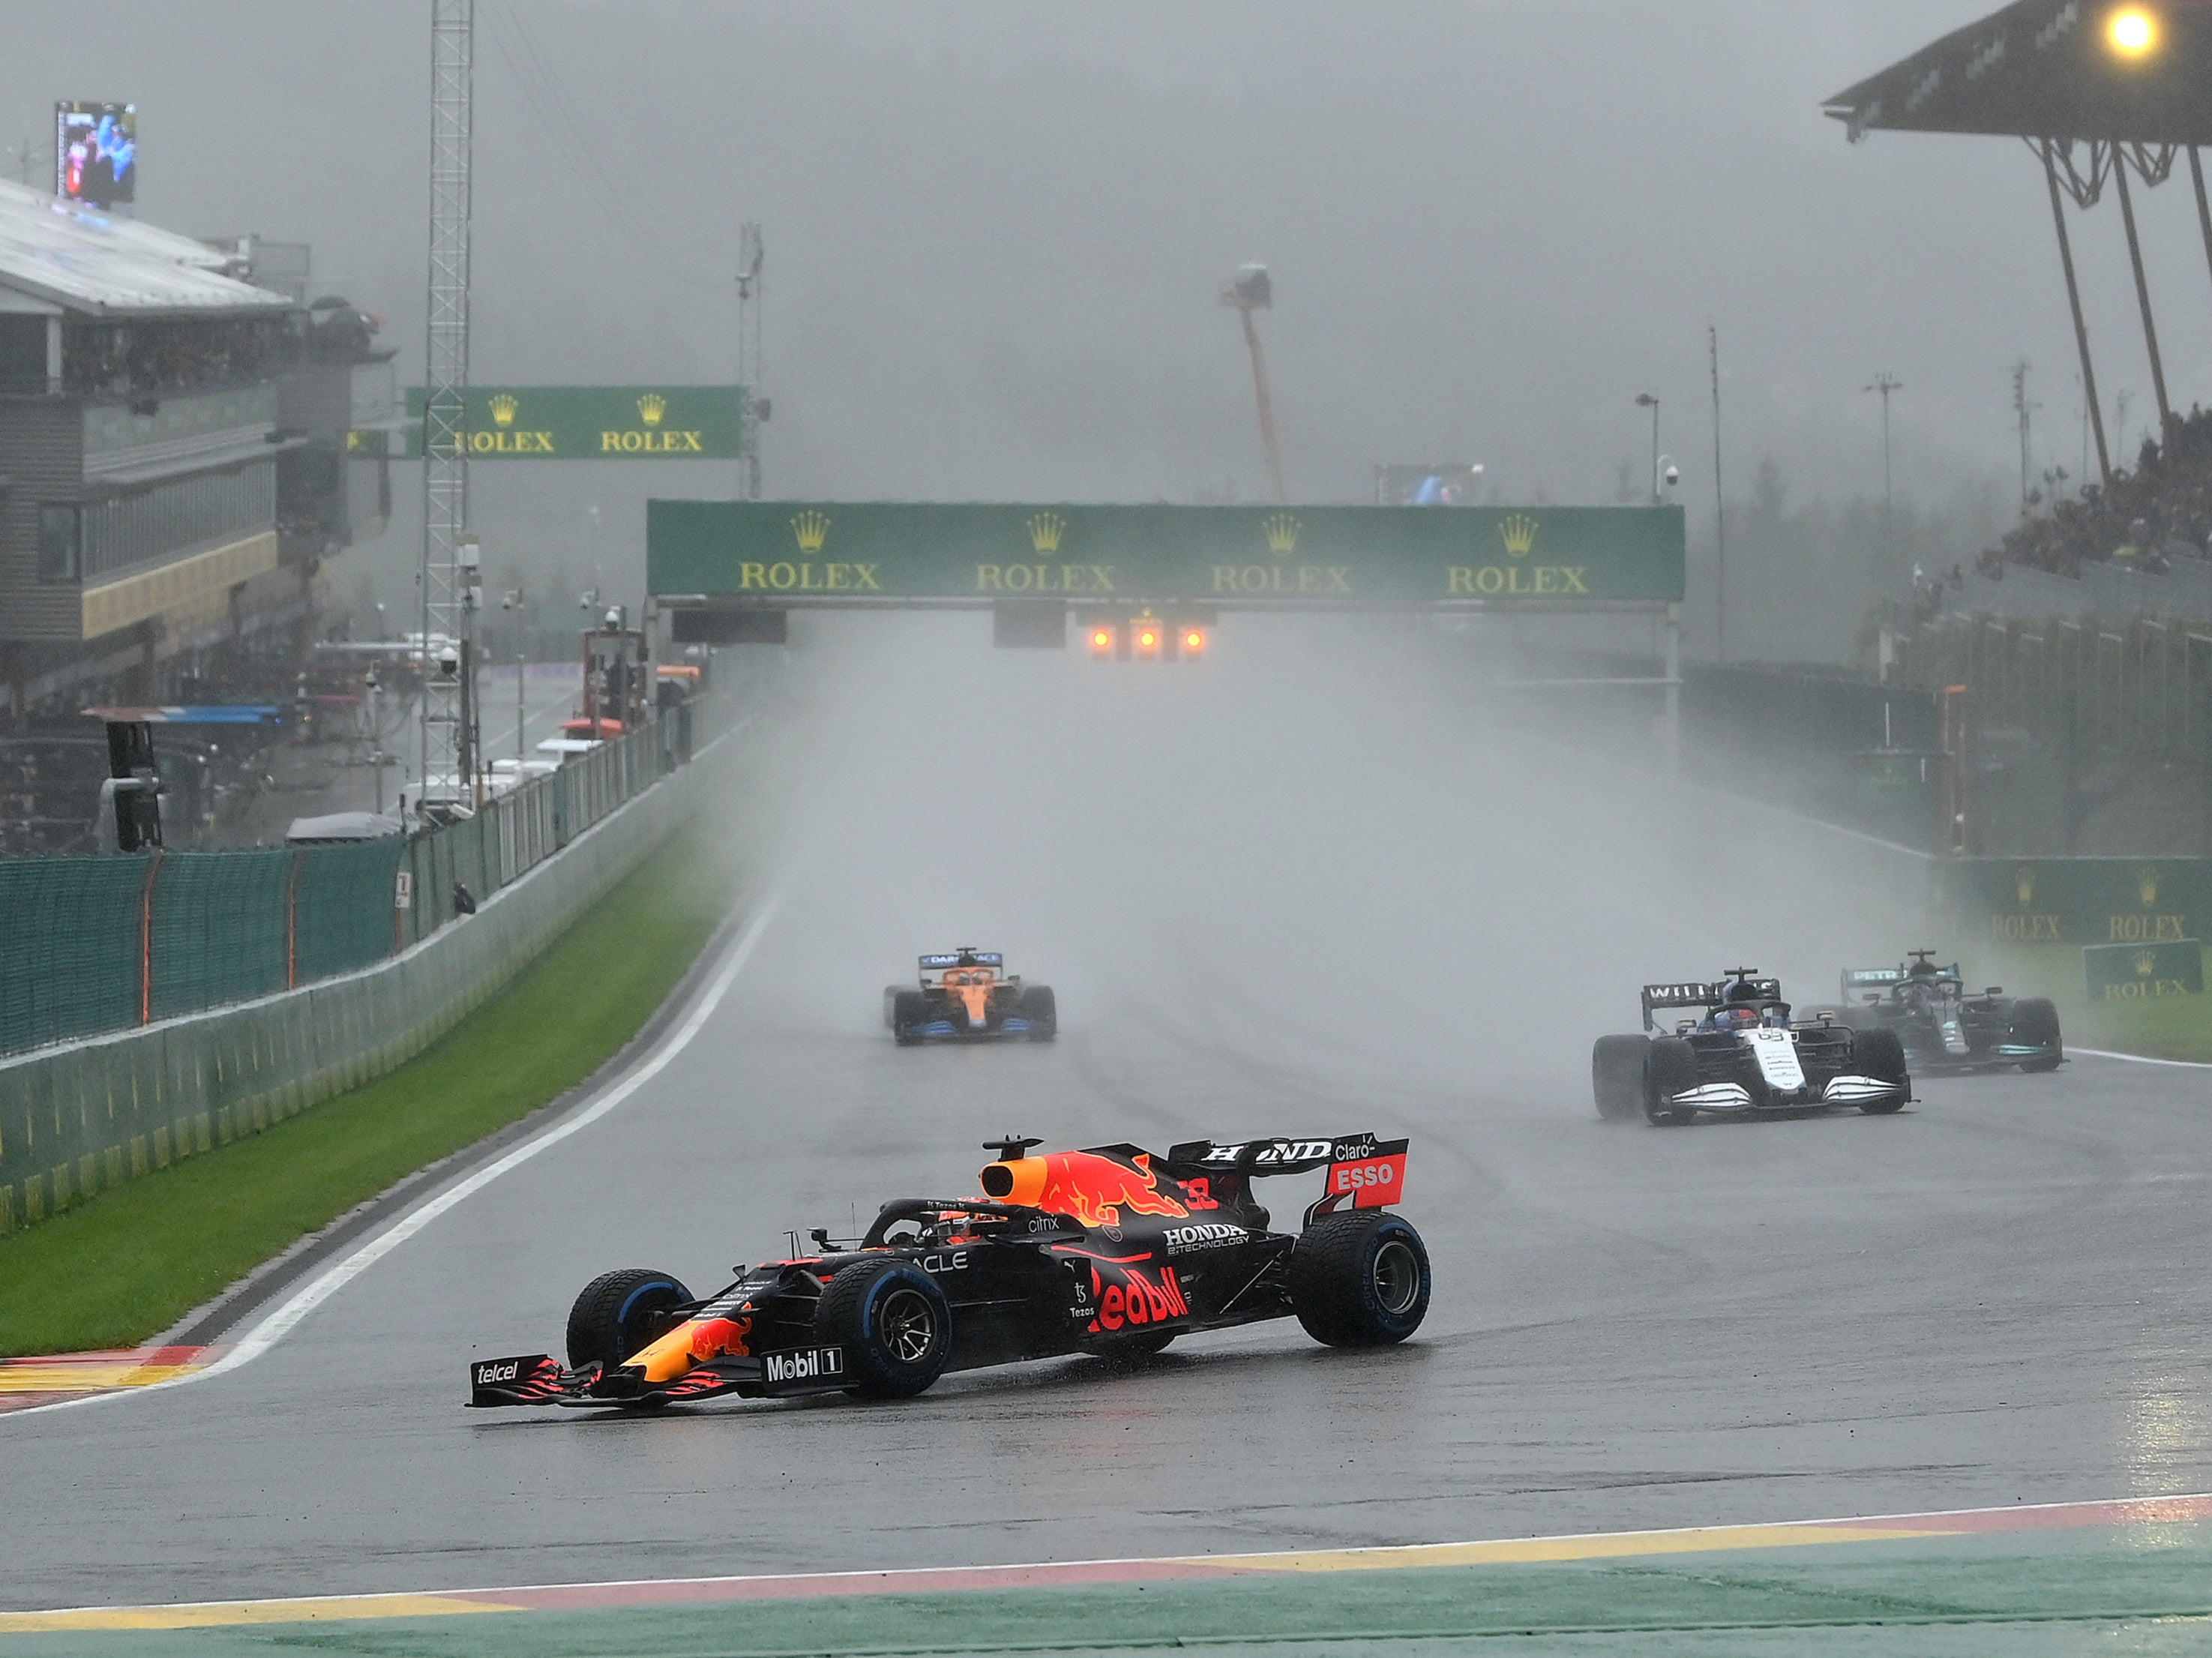 The 2021 Belgian Grand Prix was abandoned after three laps due to heavy rain